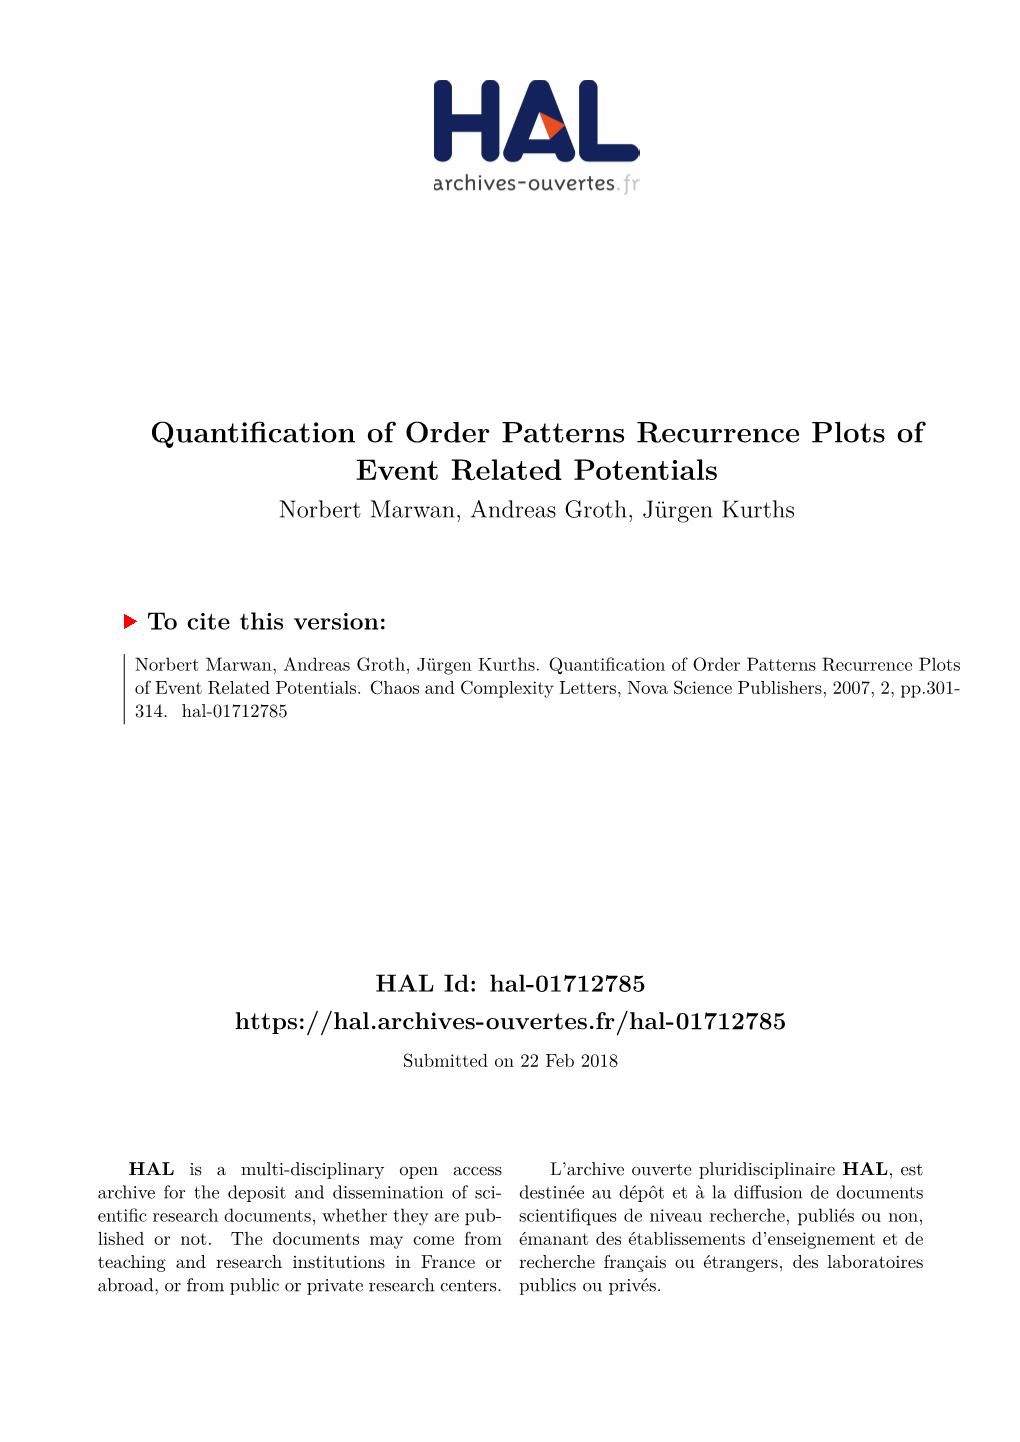 Quantification of Order Patterns Recurrence Plots of Event Related Potentials Norbert Marwan, Andreas Groth, Jürgen Kurths